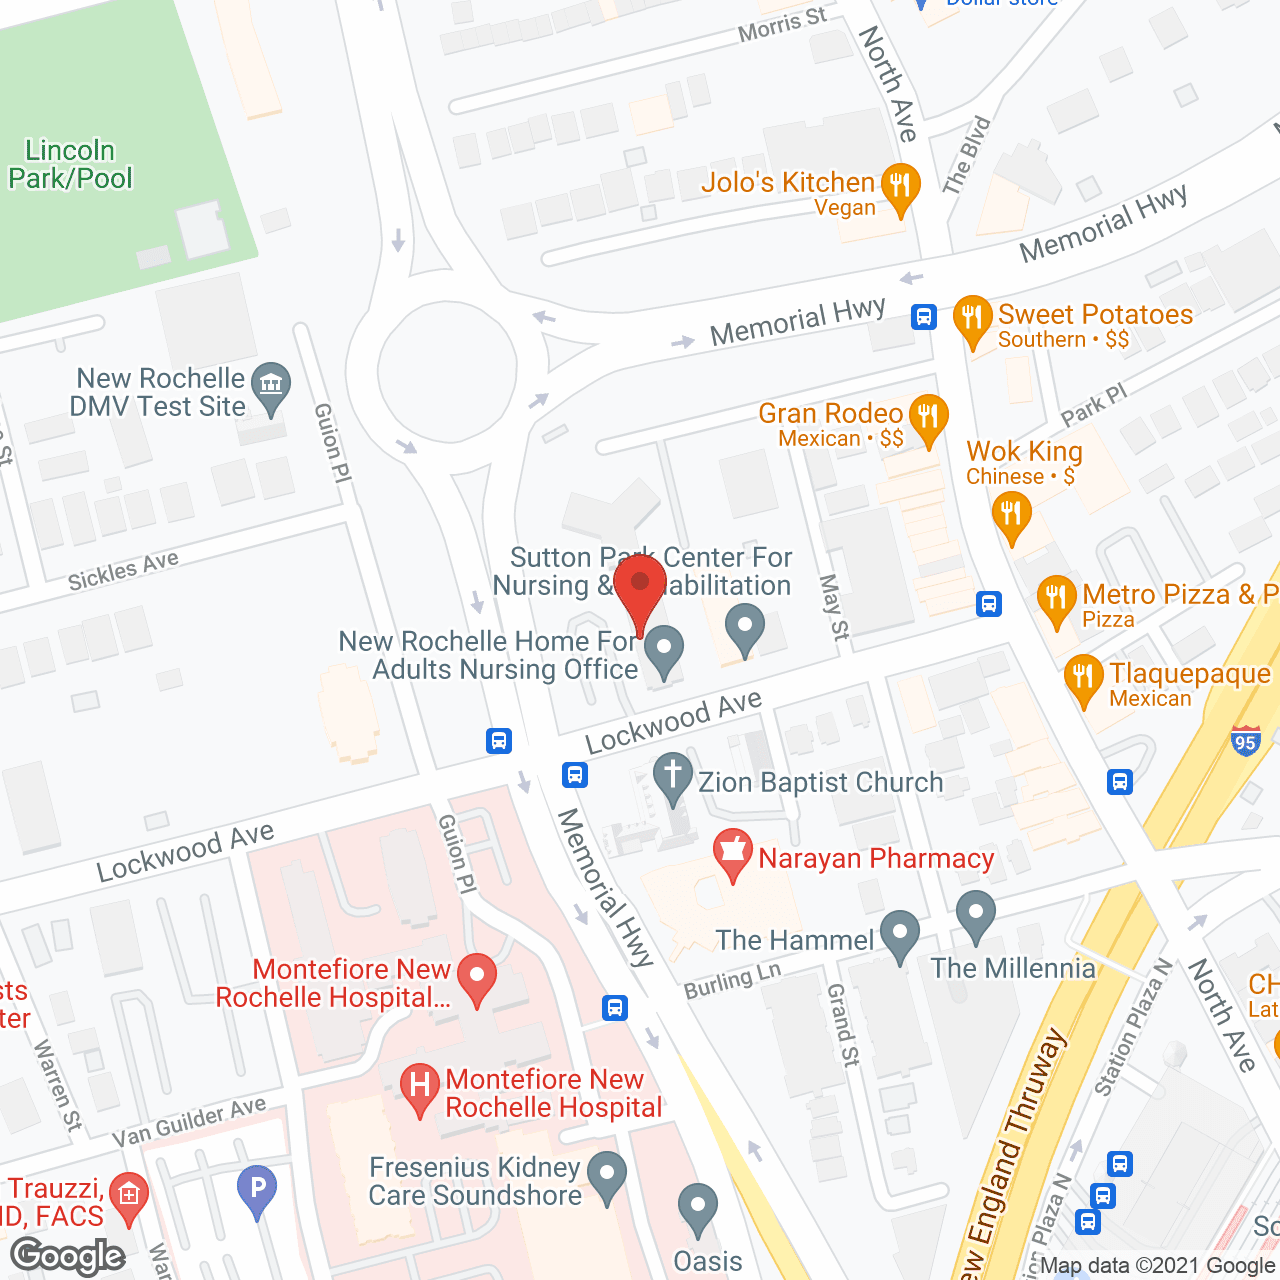 The Eliot at New Rochelle in google map